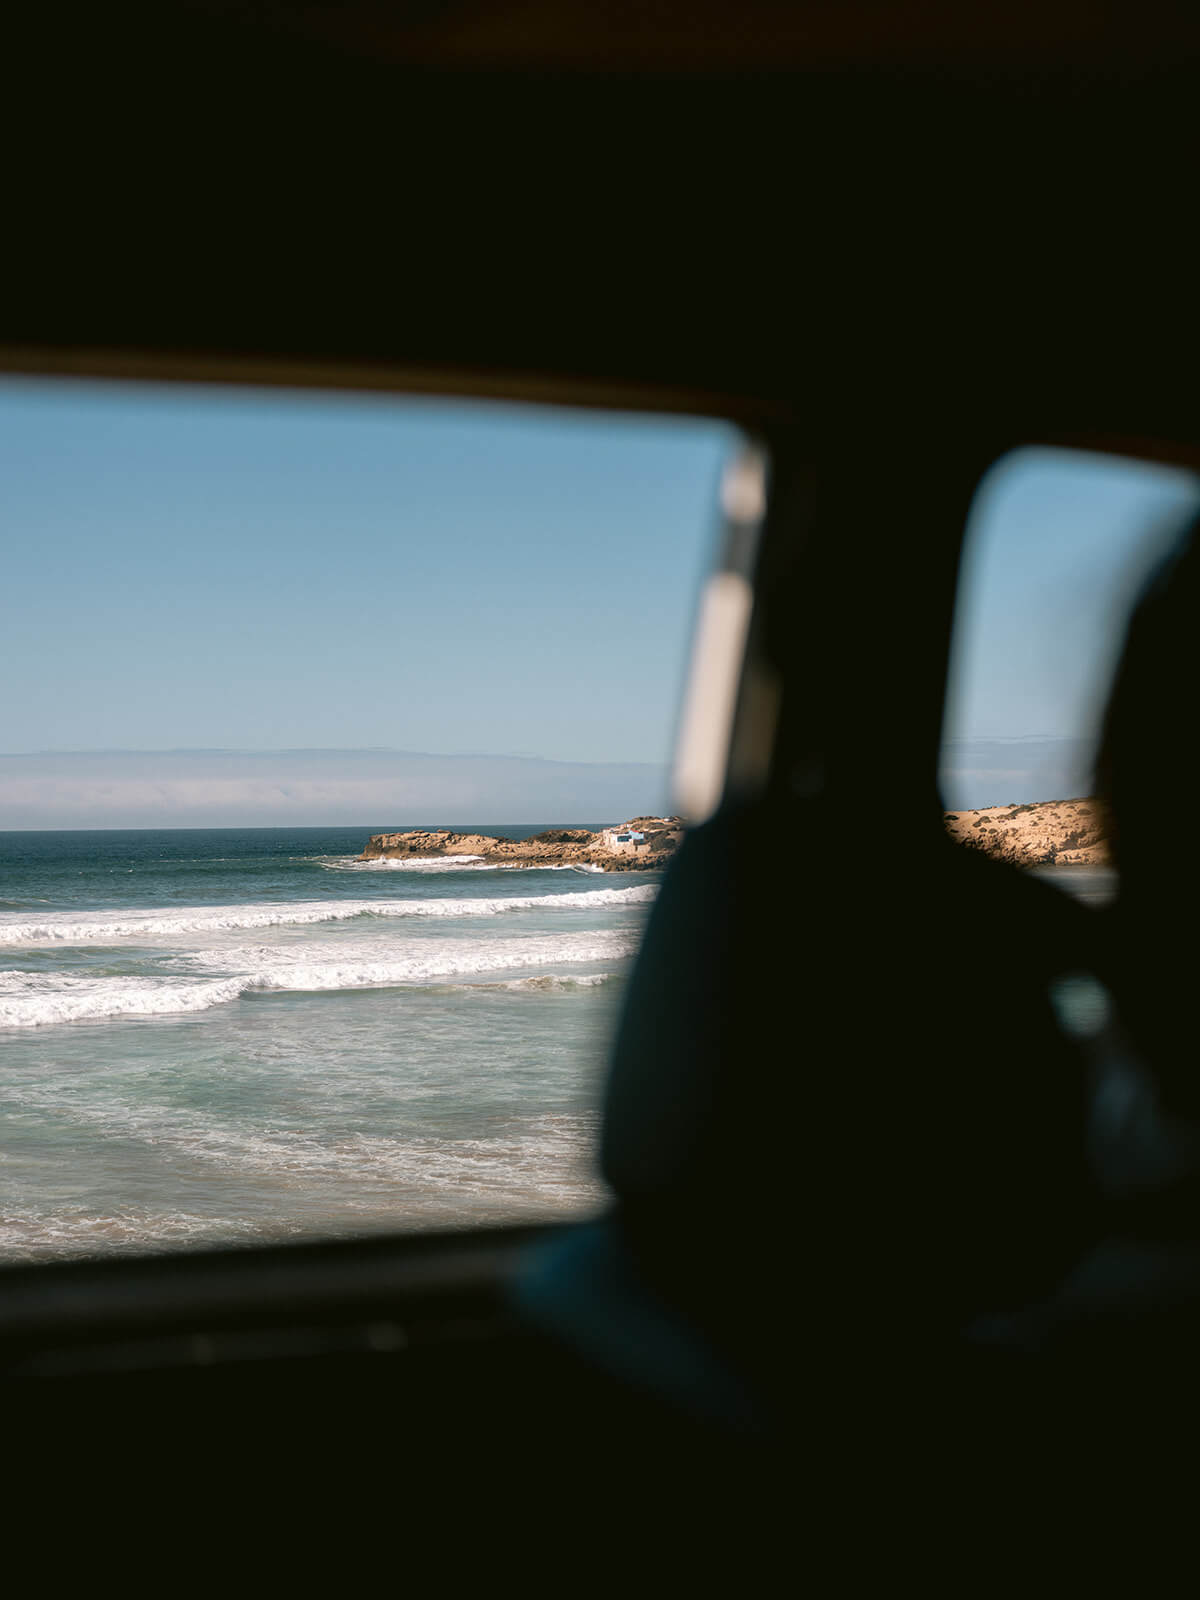 View at Imsouane bay - longest left wave of Africa, from the surf van | Colorful, adventurous travel photography by Raisa Zwart